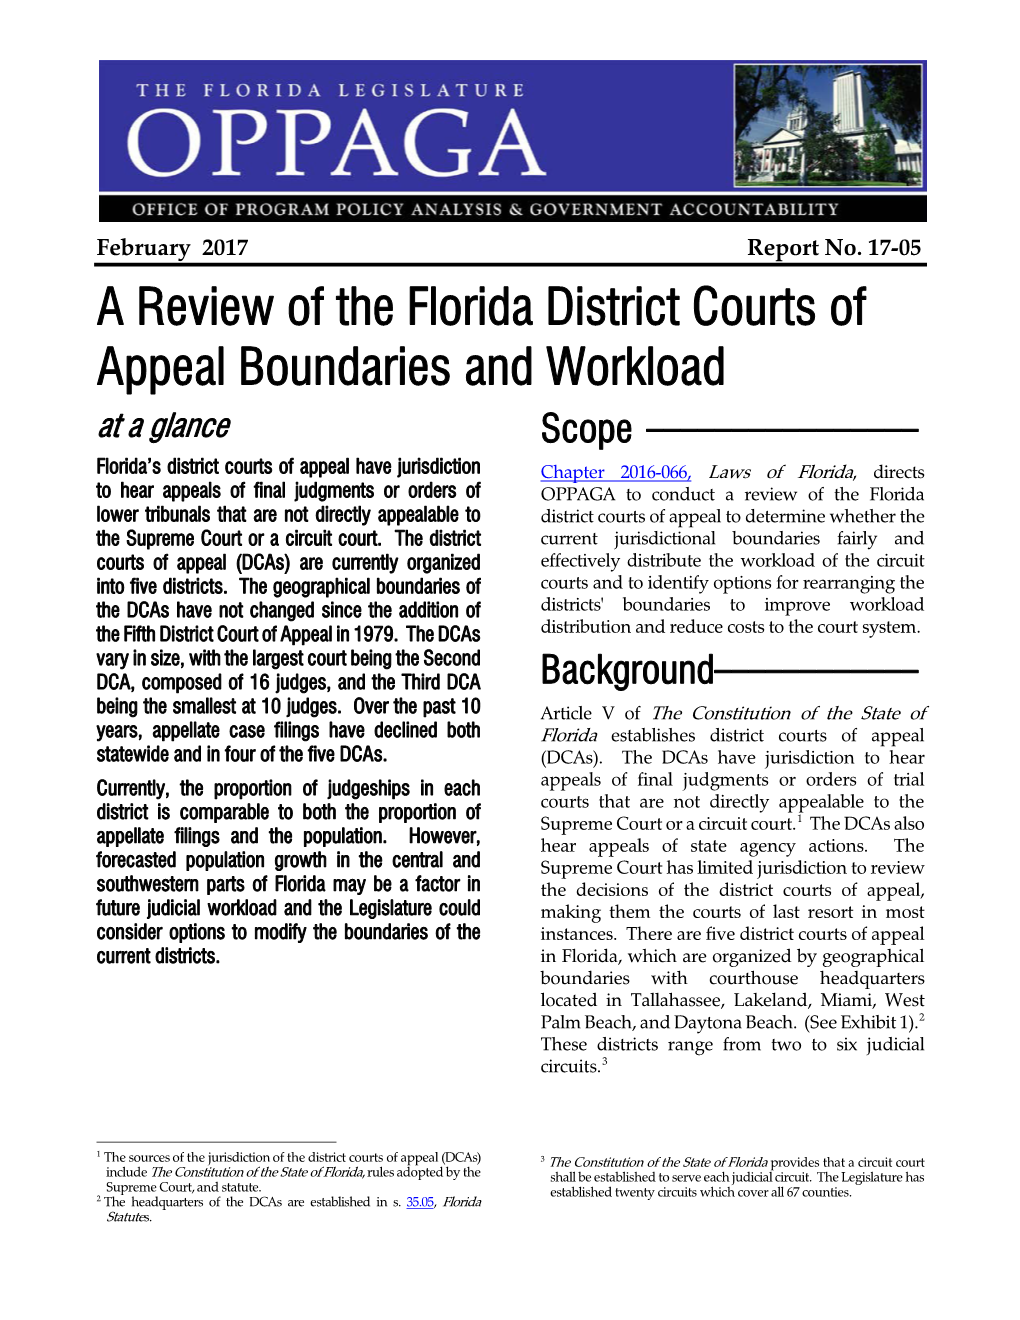 A Review of the Florida District Courts of Appeal Boundaries and Workload